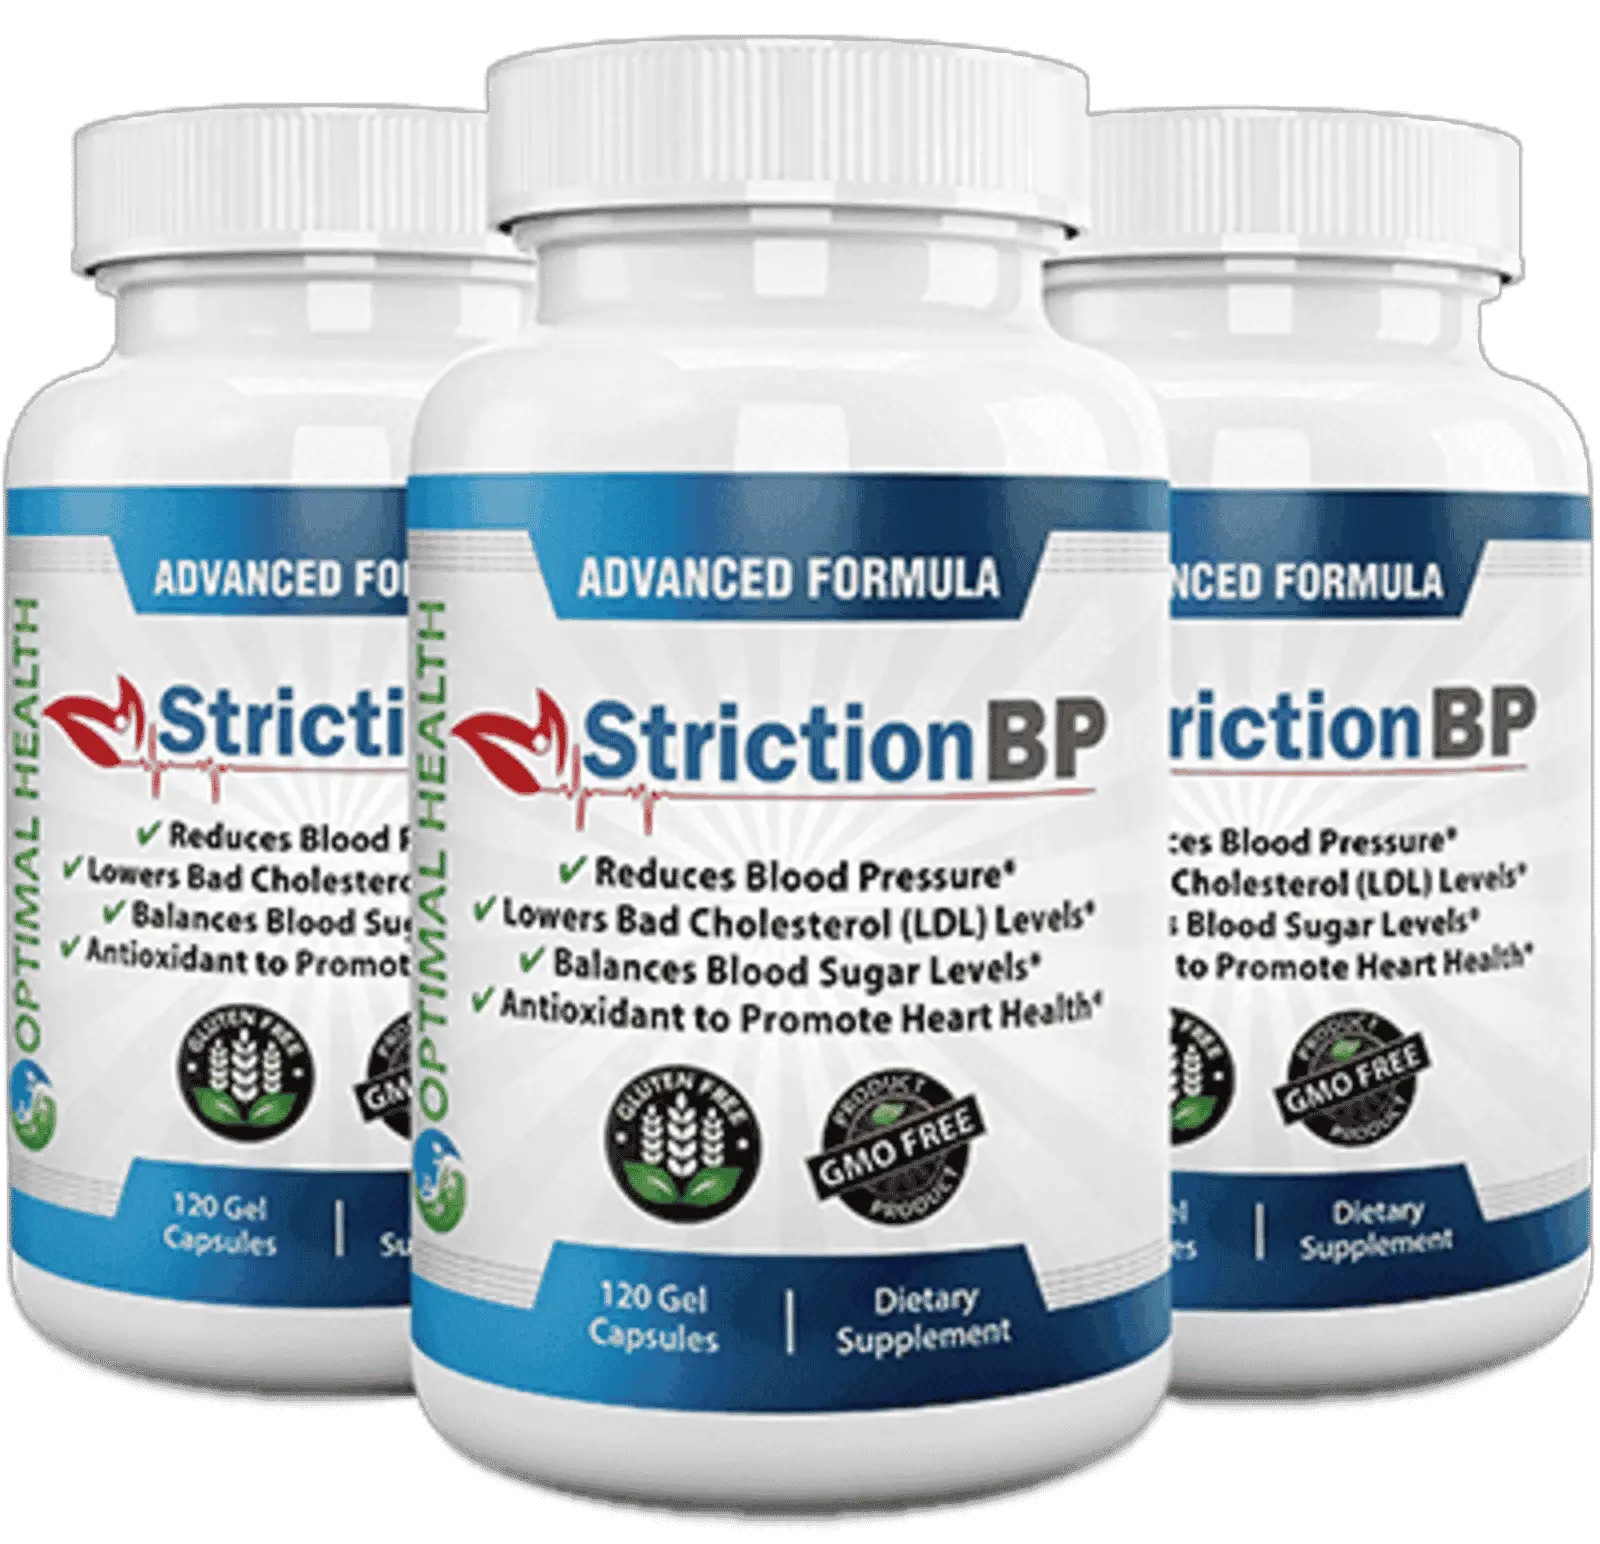 Striction BP Formula Reviews: Any Side Effects? Safe Ingredients? By MJ ...